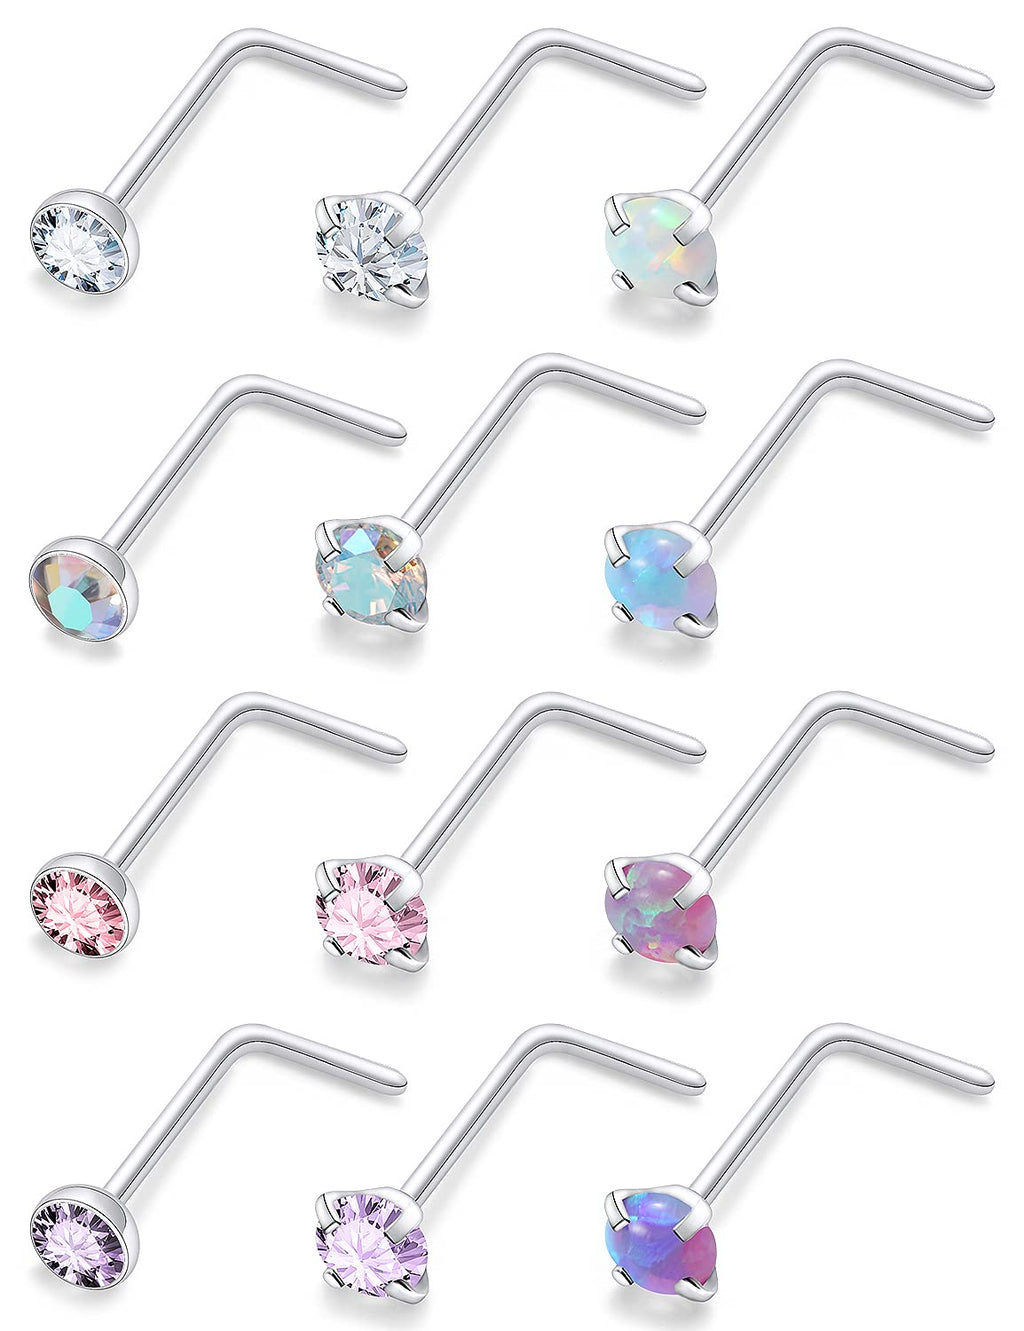 [Australia] - Uzgtvy 20G Opal Nose Rings Studs Surgical Steel Nose Nostril Piercing Jewelry for Women Men Girl CZ Opal 2MM 12Pcs L Shaped- Silver Tone 